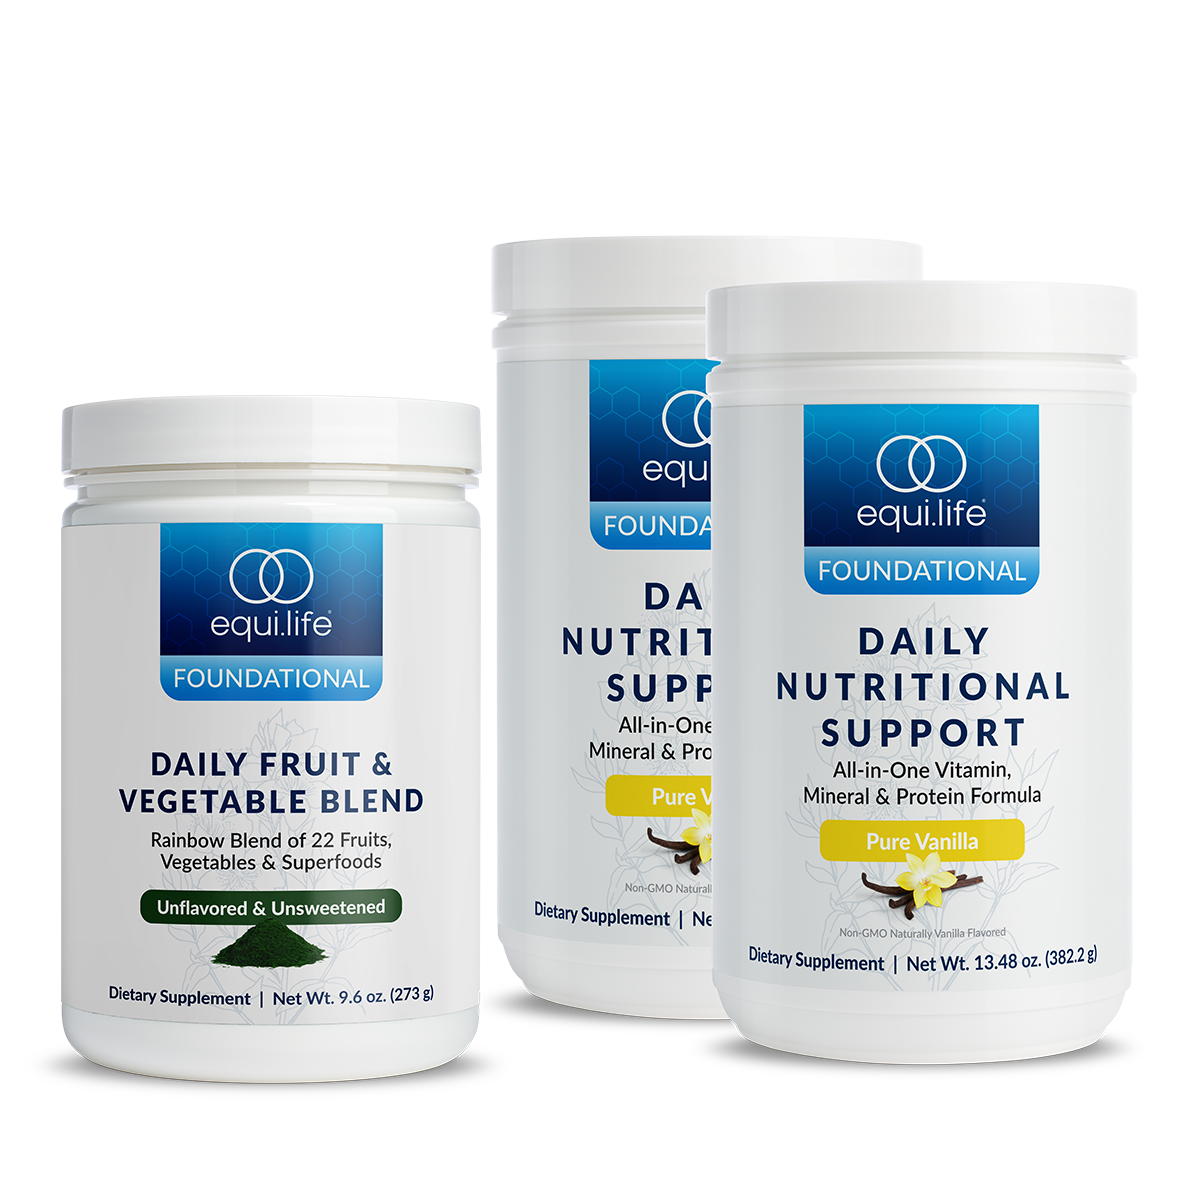 2 Daily Nutritional Support & 1 Fruit & Vegetable Blend